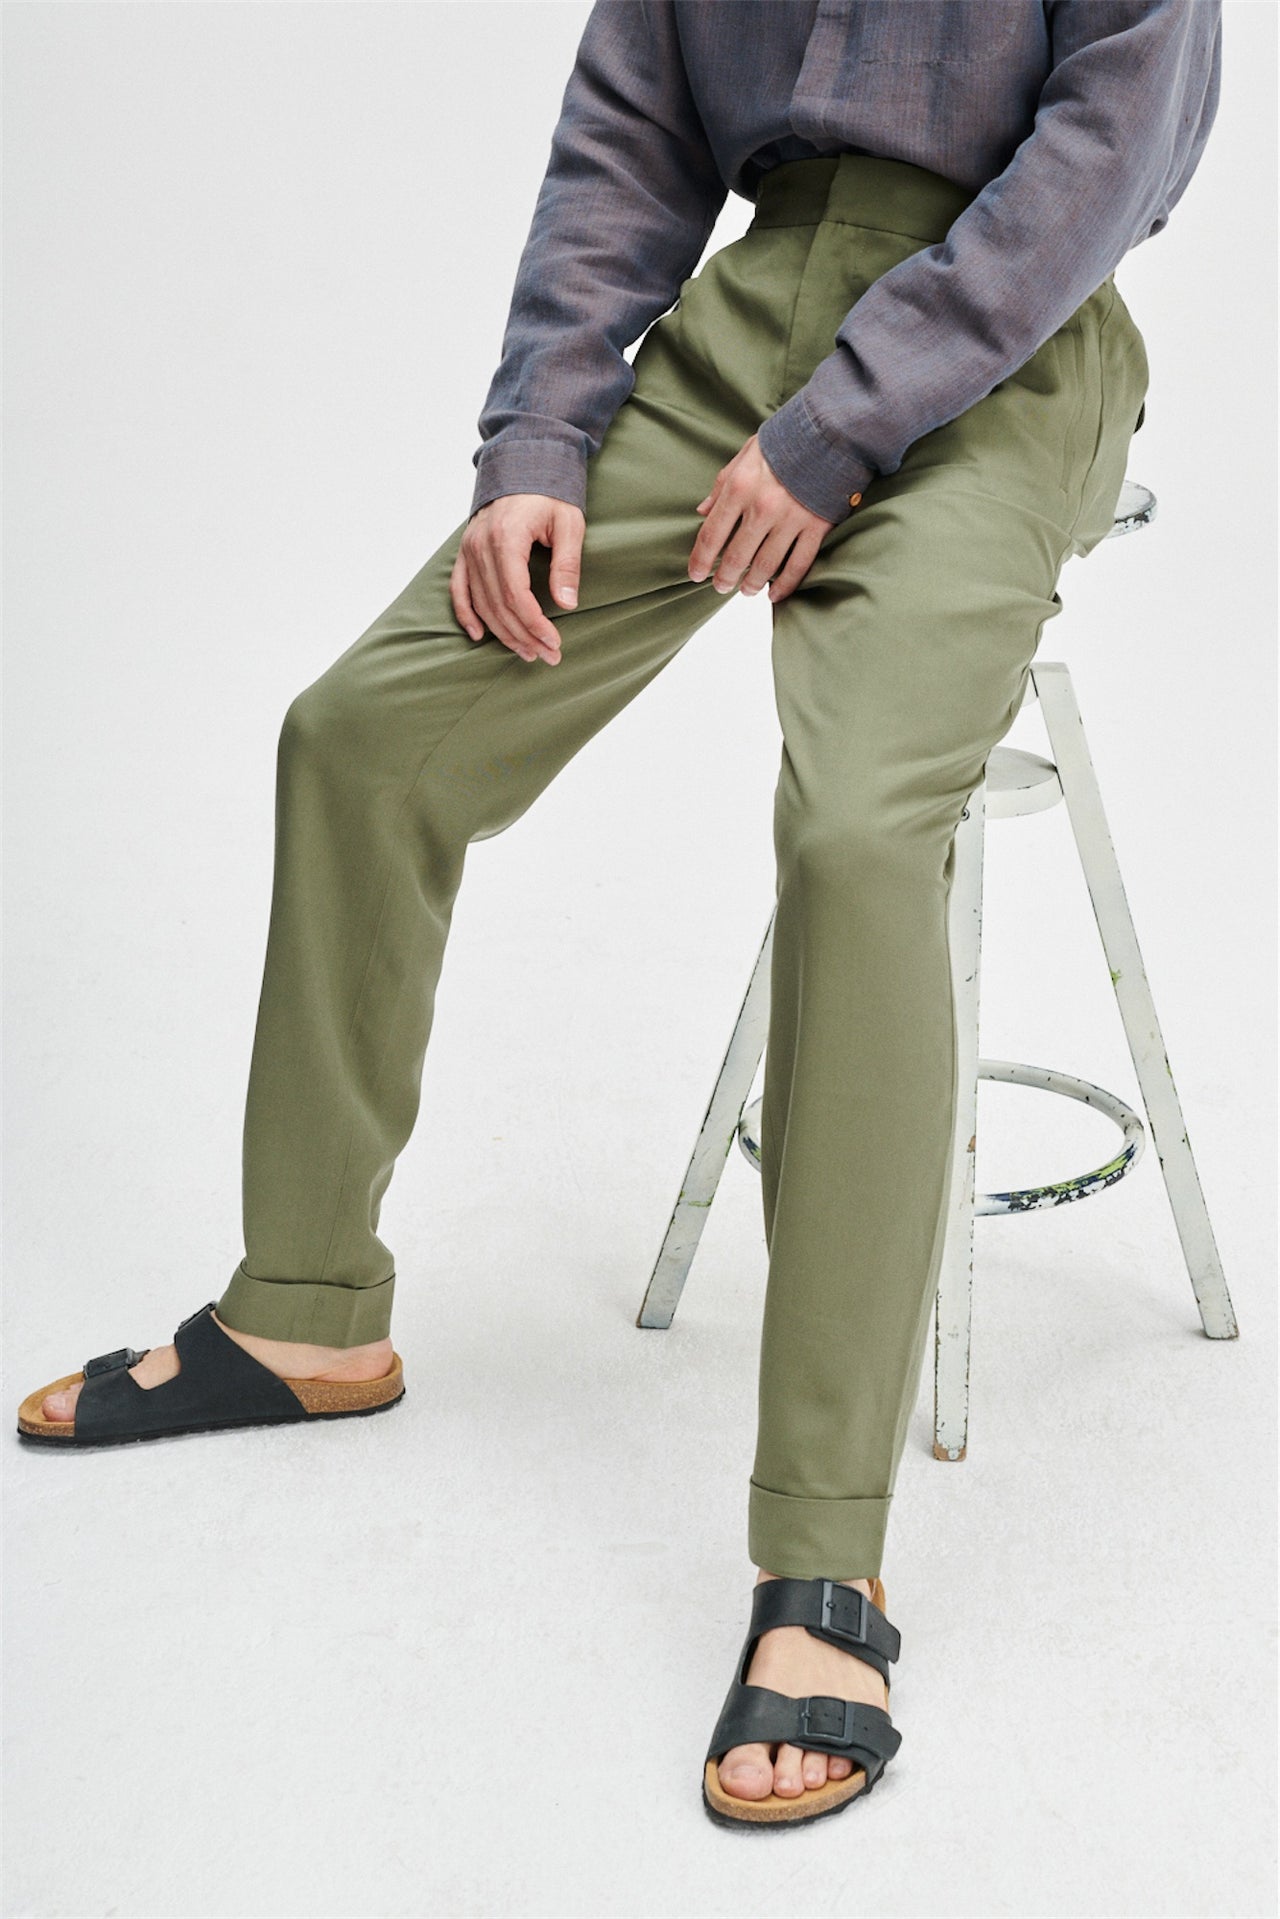 Garden Trousers in an Olive Green Sustainable Smooth and Soft Italian Lyocell Gabardine